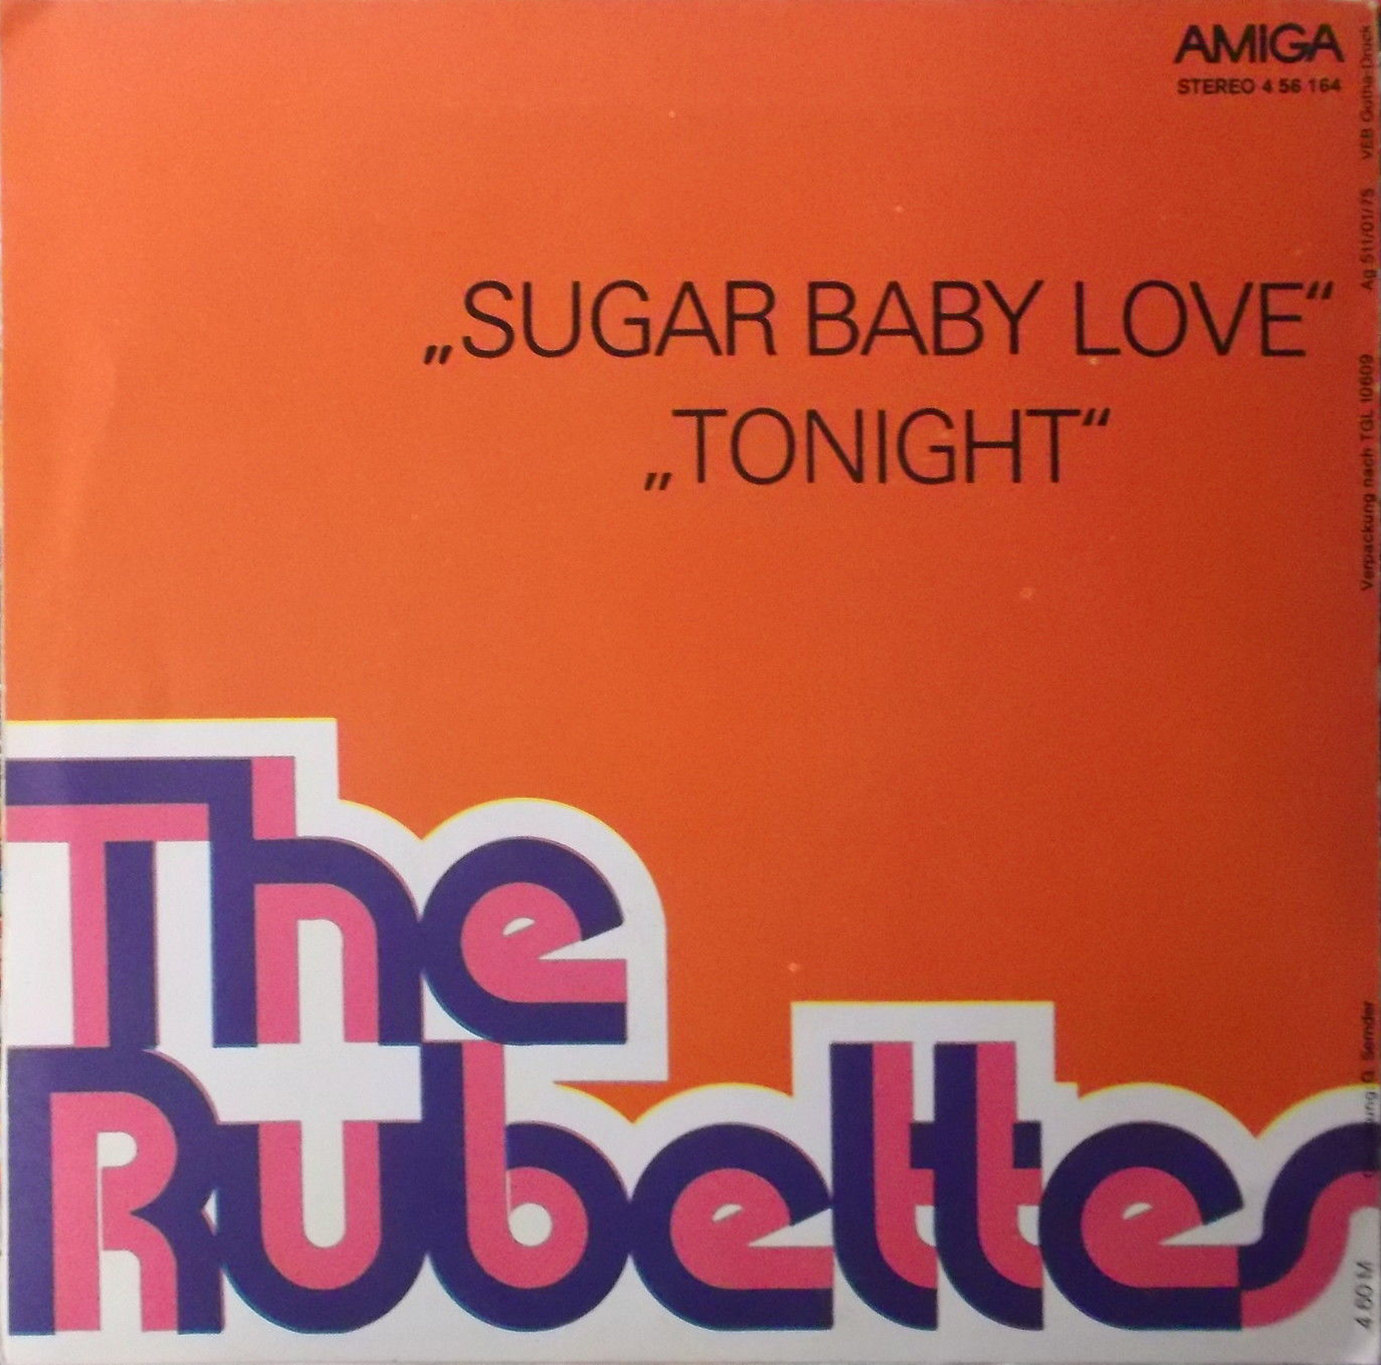 The Rubettes Sugar Baby Love Single Cover Fonts In Use